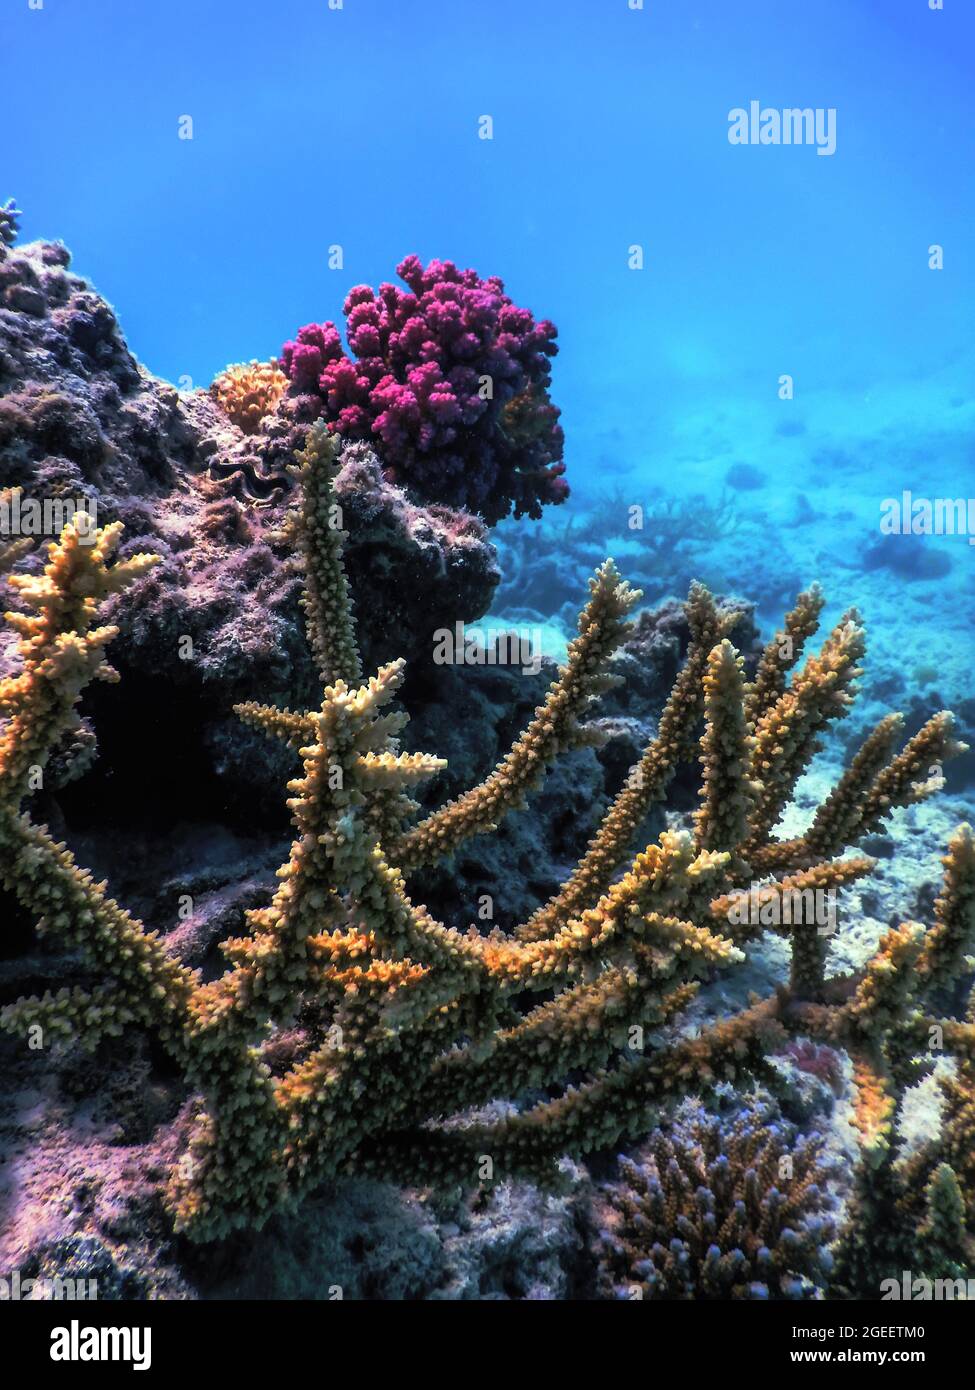 Staghorn coral (Acropora cervicornis) Tropical waters, Marine life Stock Photo